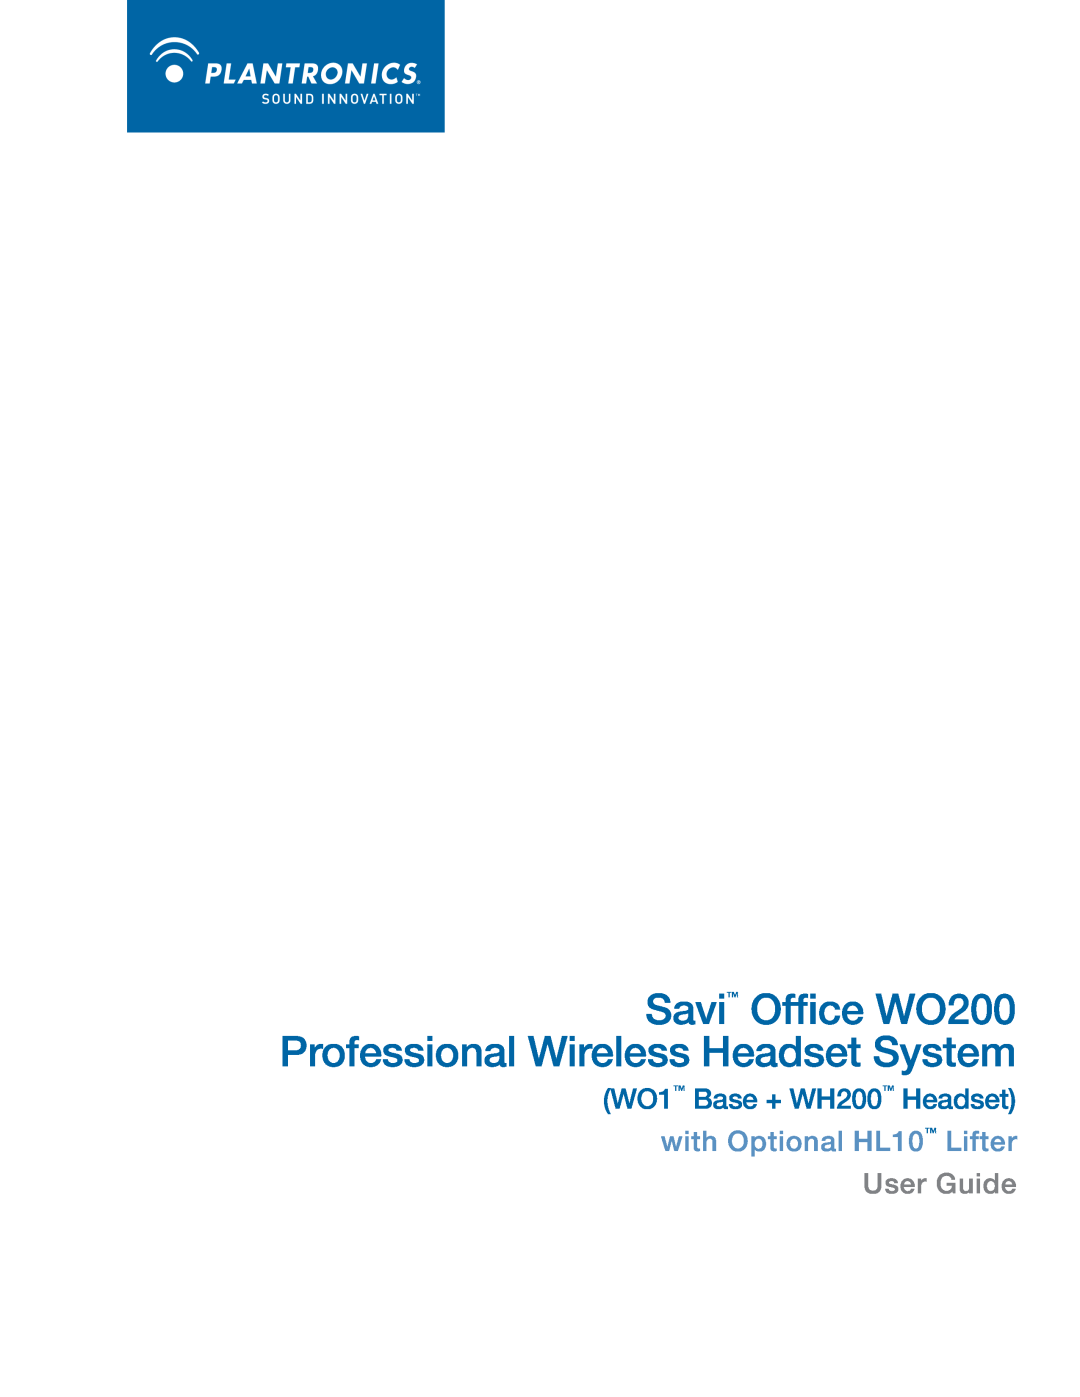 Plantronics manual Savi Office WO200 Wireless Headset System, with Optional HL10 Lifter User Guide 